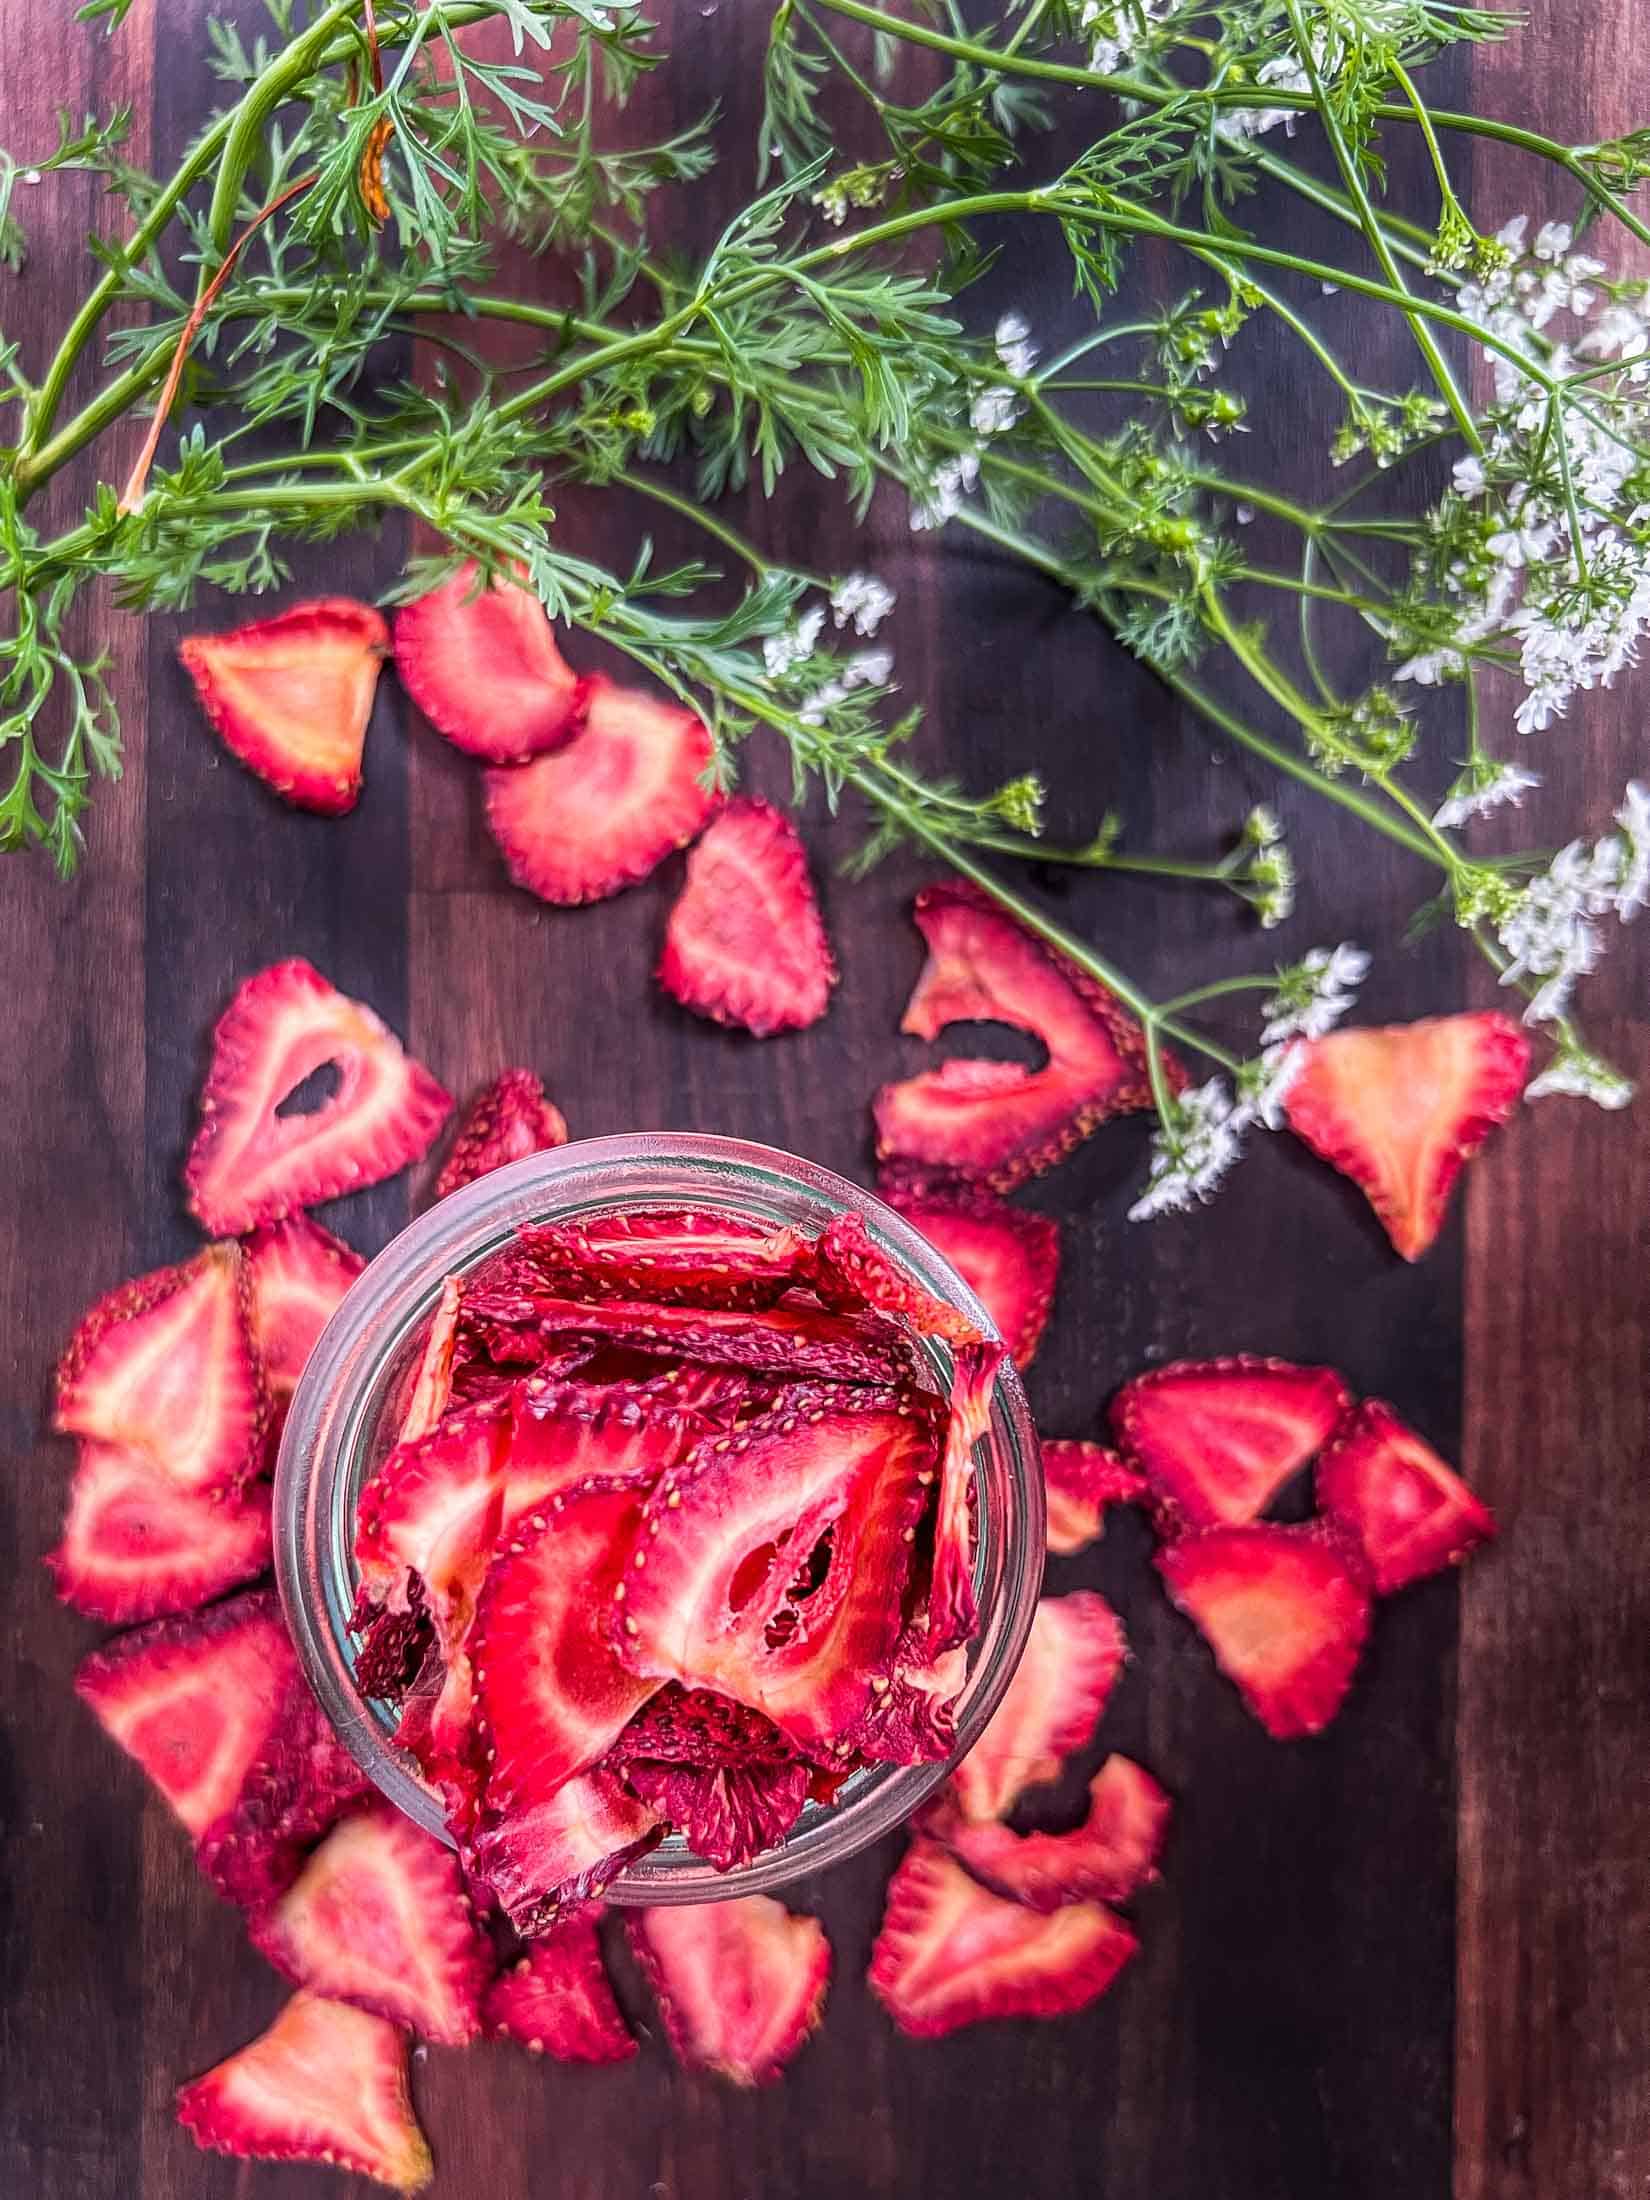 Dehydrated strawberries filling a glass jar with dried berries spilled out around and fresh greens beside.